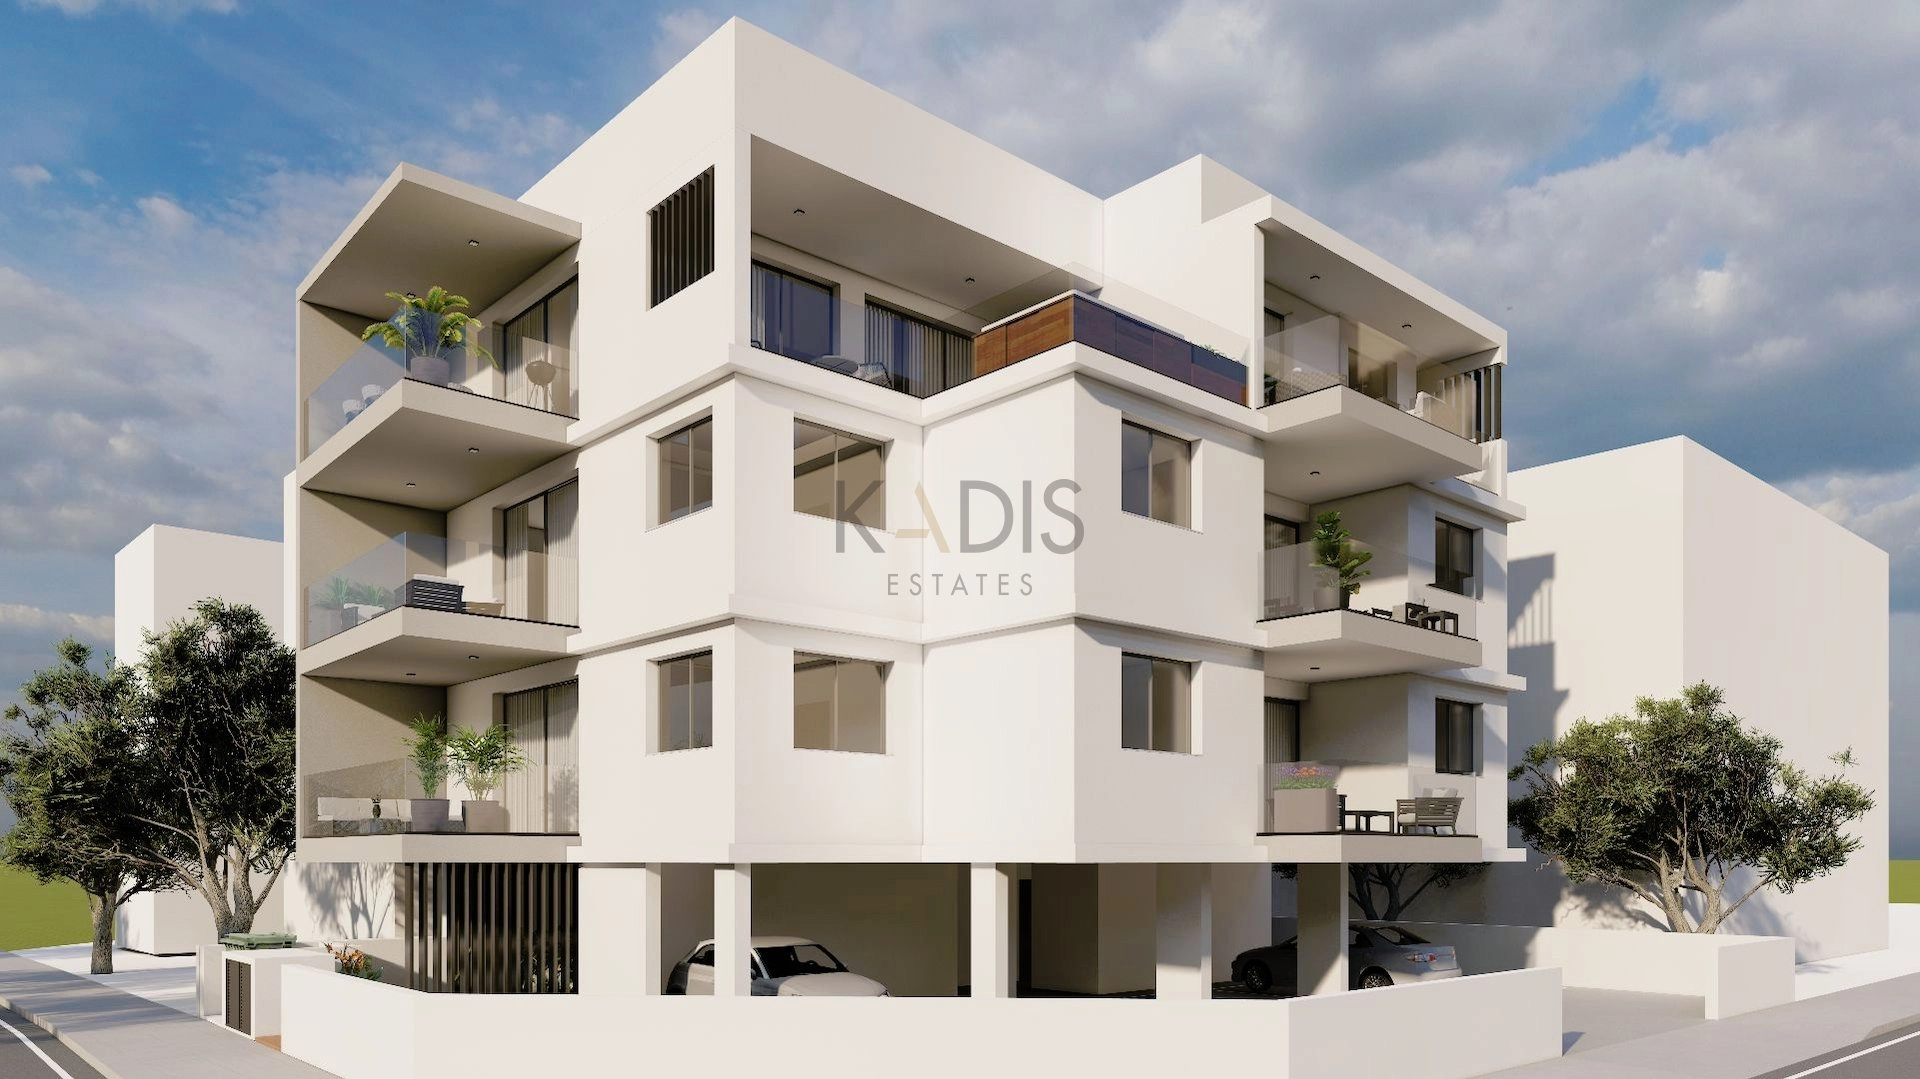 3 Bedroom Apartment for Sale in Limassol – Kapsalos